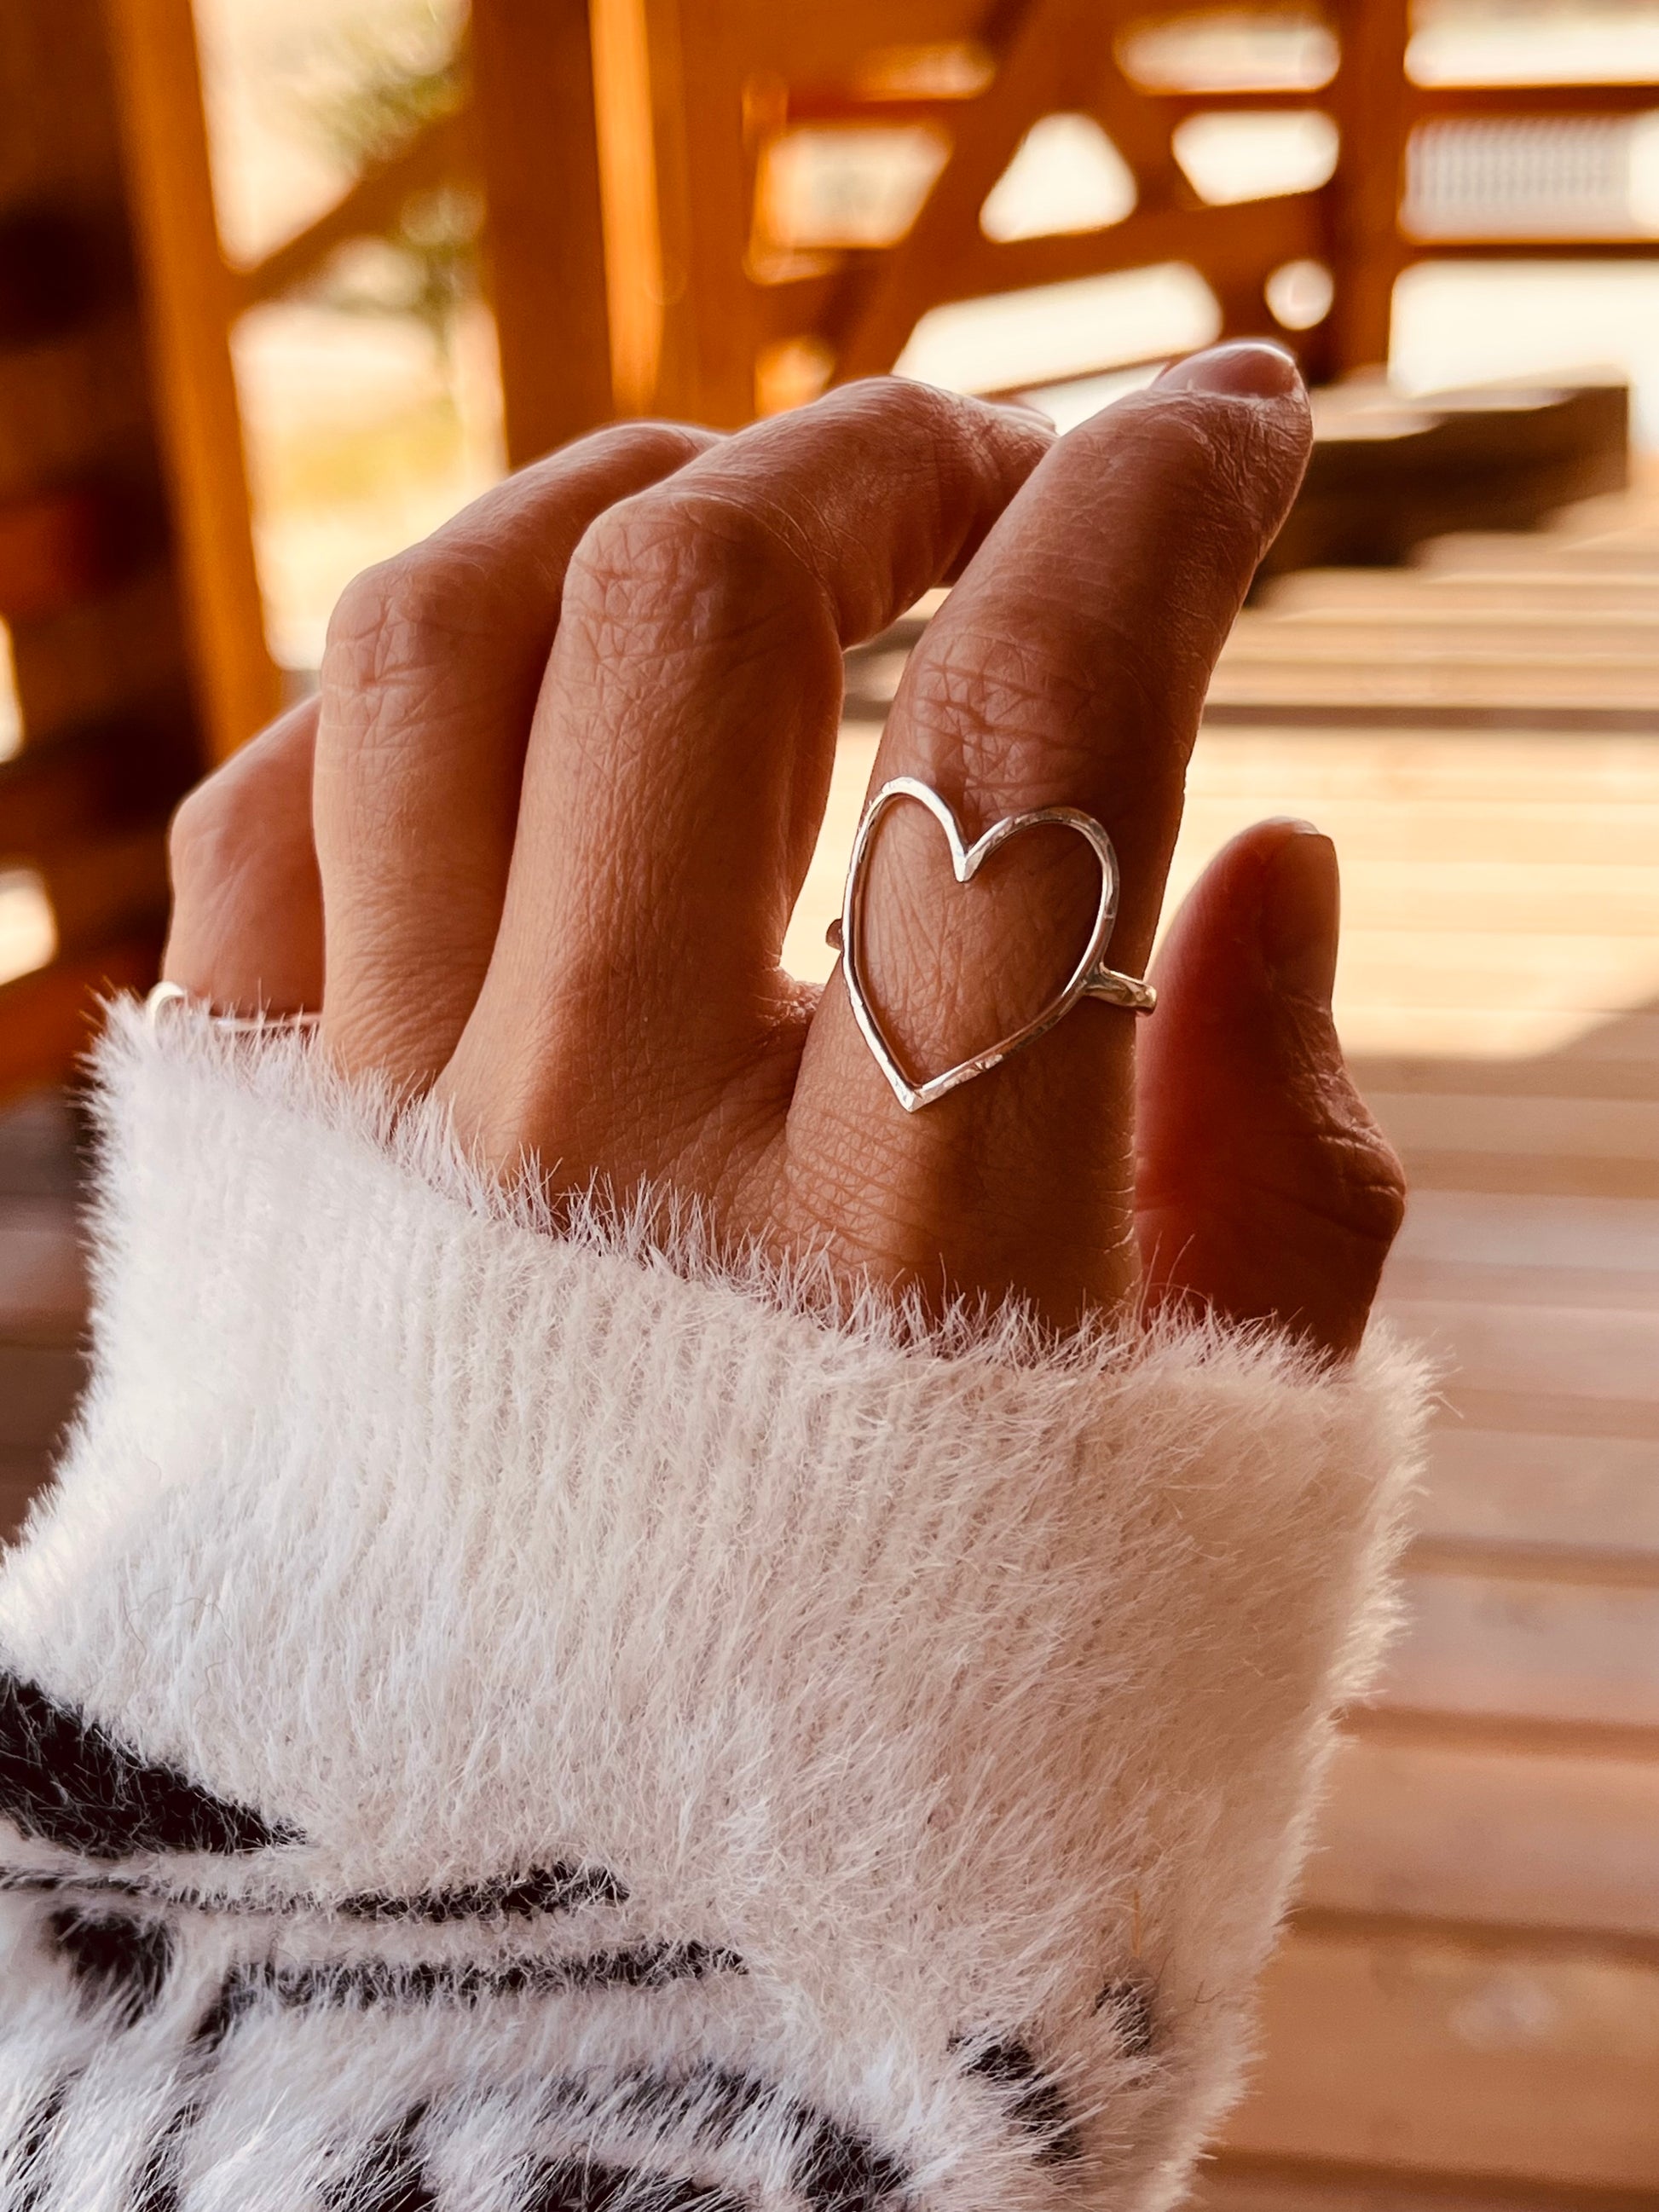 Large Open Heart Ring, Statement Rings, Stacking Rings, Stackable Rings, Dainty Rings, Delicate Rings. Best Friends Gifts, Friendship Jewelry, Mothers Gift, Wife Gift Ideas,  Grandmothers Gifts